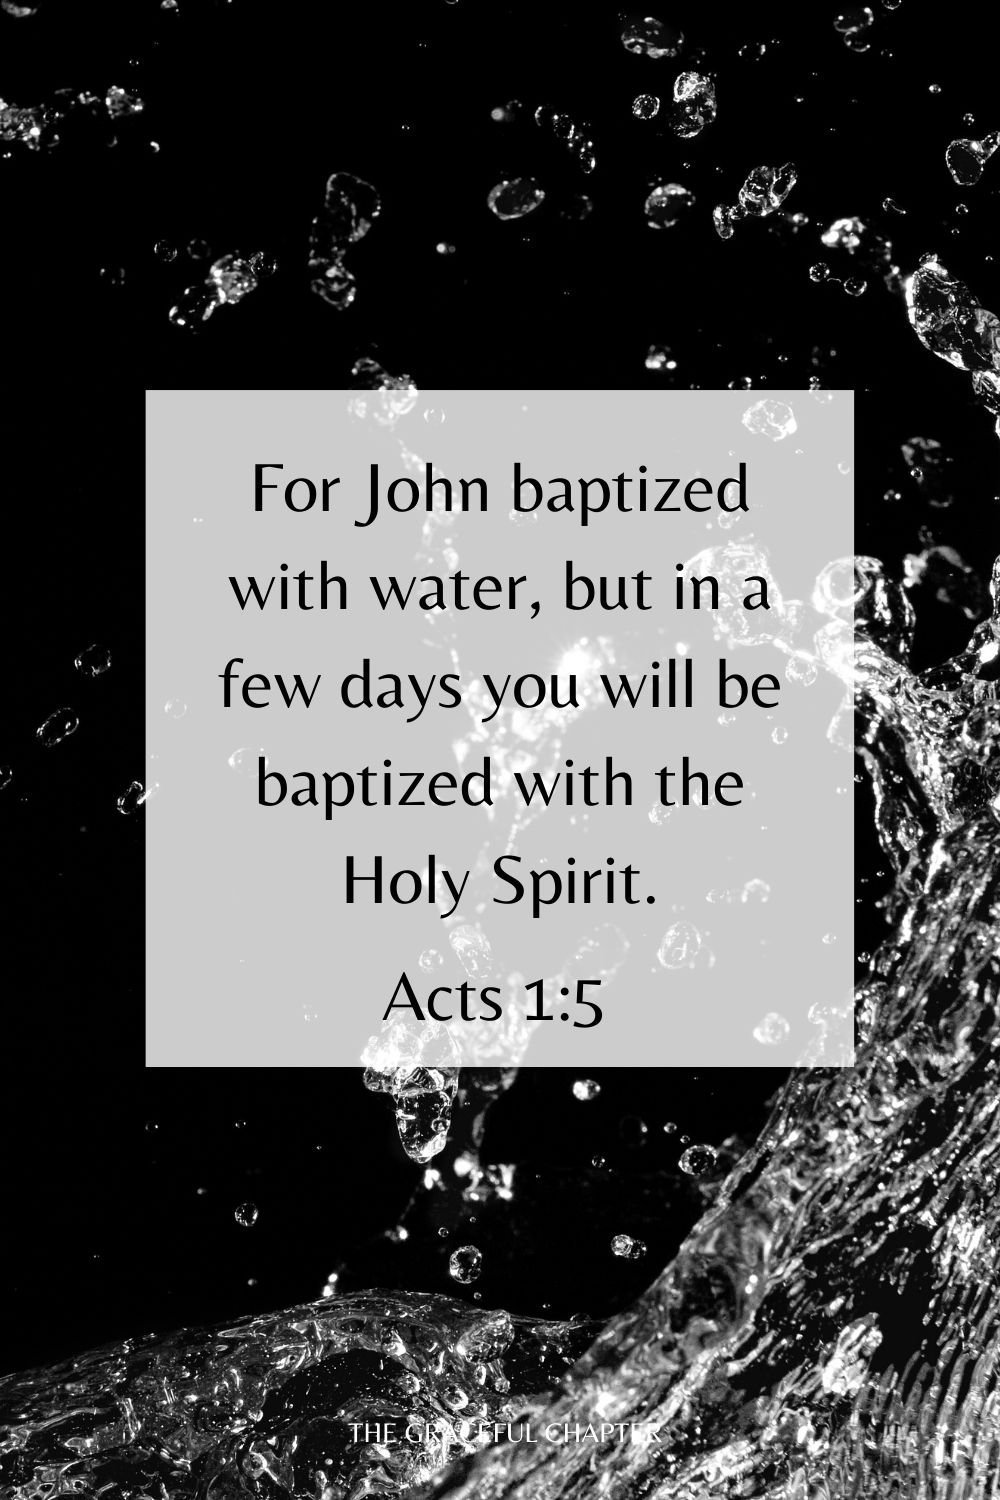 For John baptized with water, but in a few days you will be baptized with the Holy Spirit. Acts 1:5